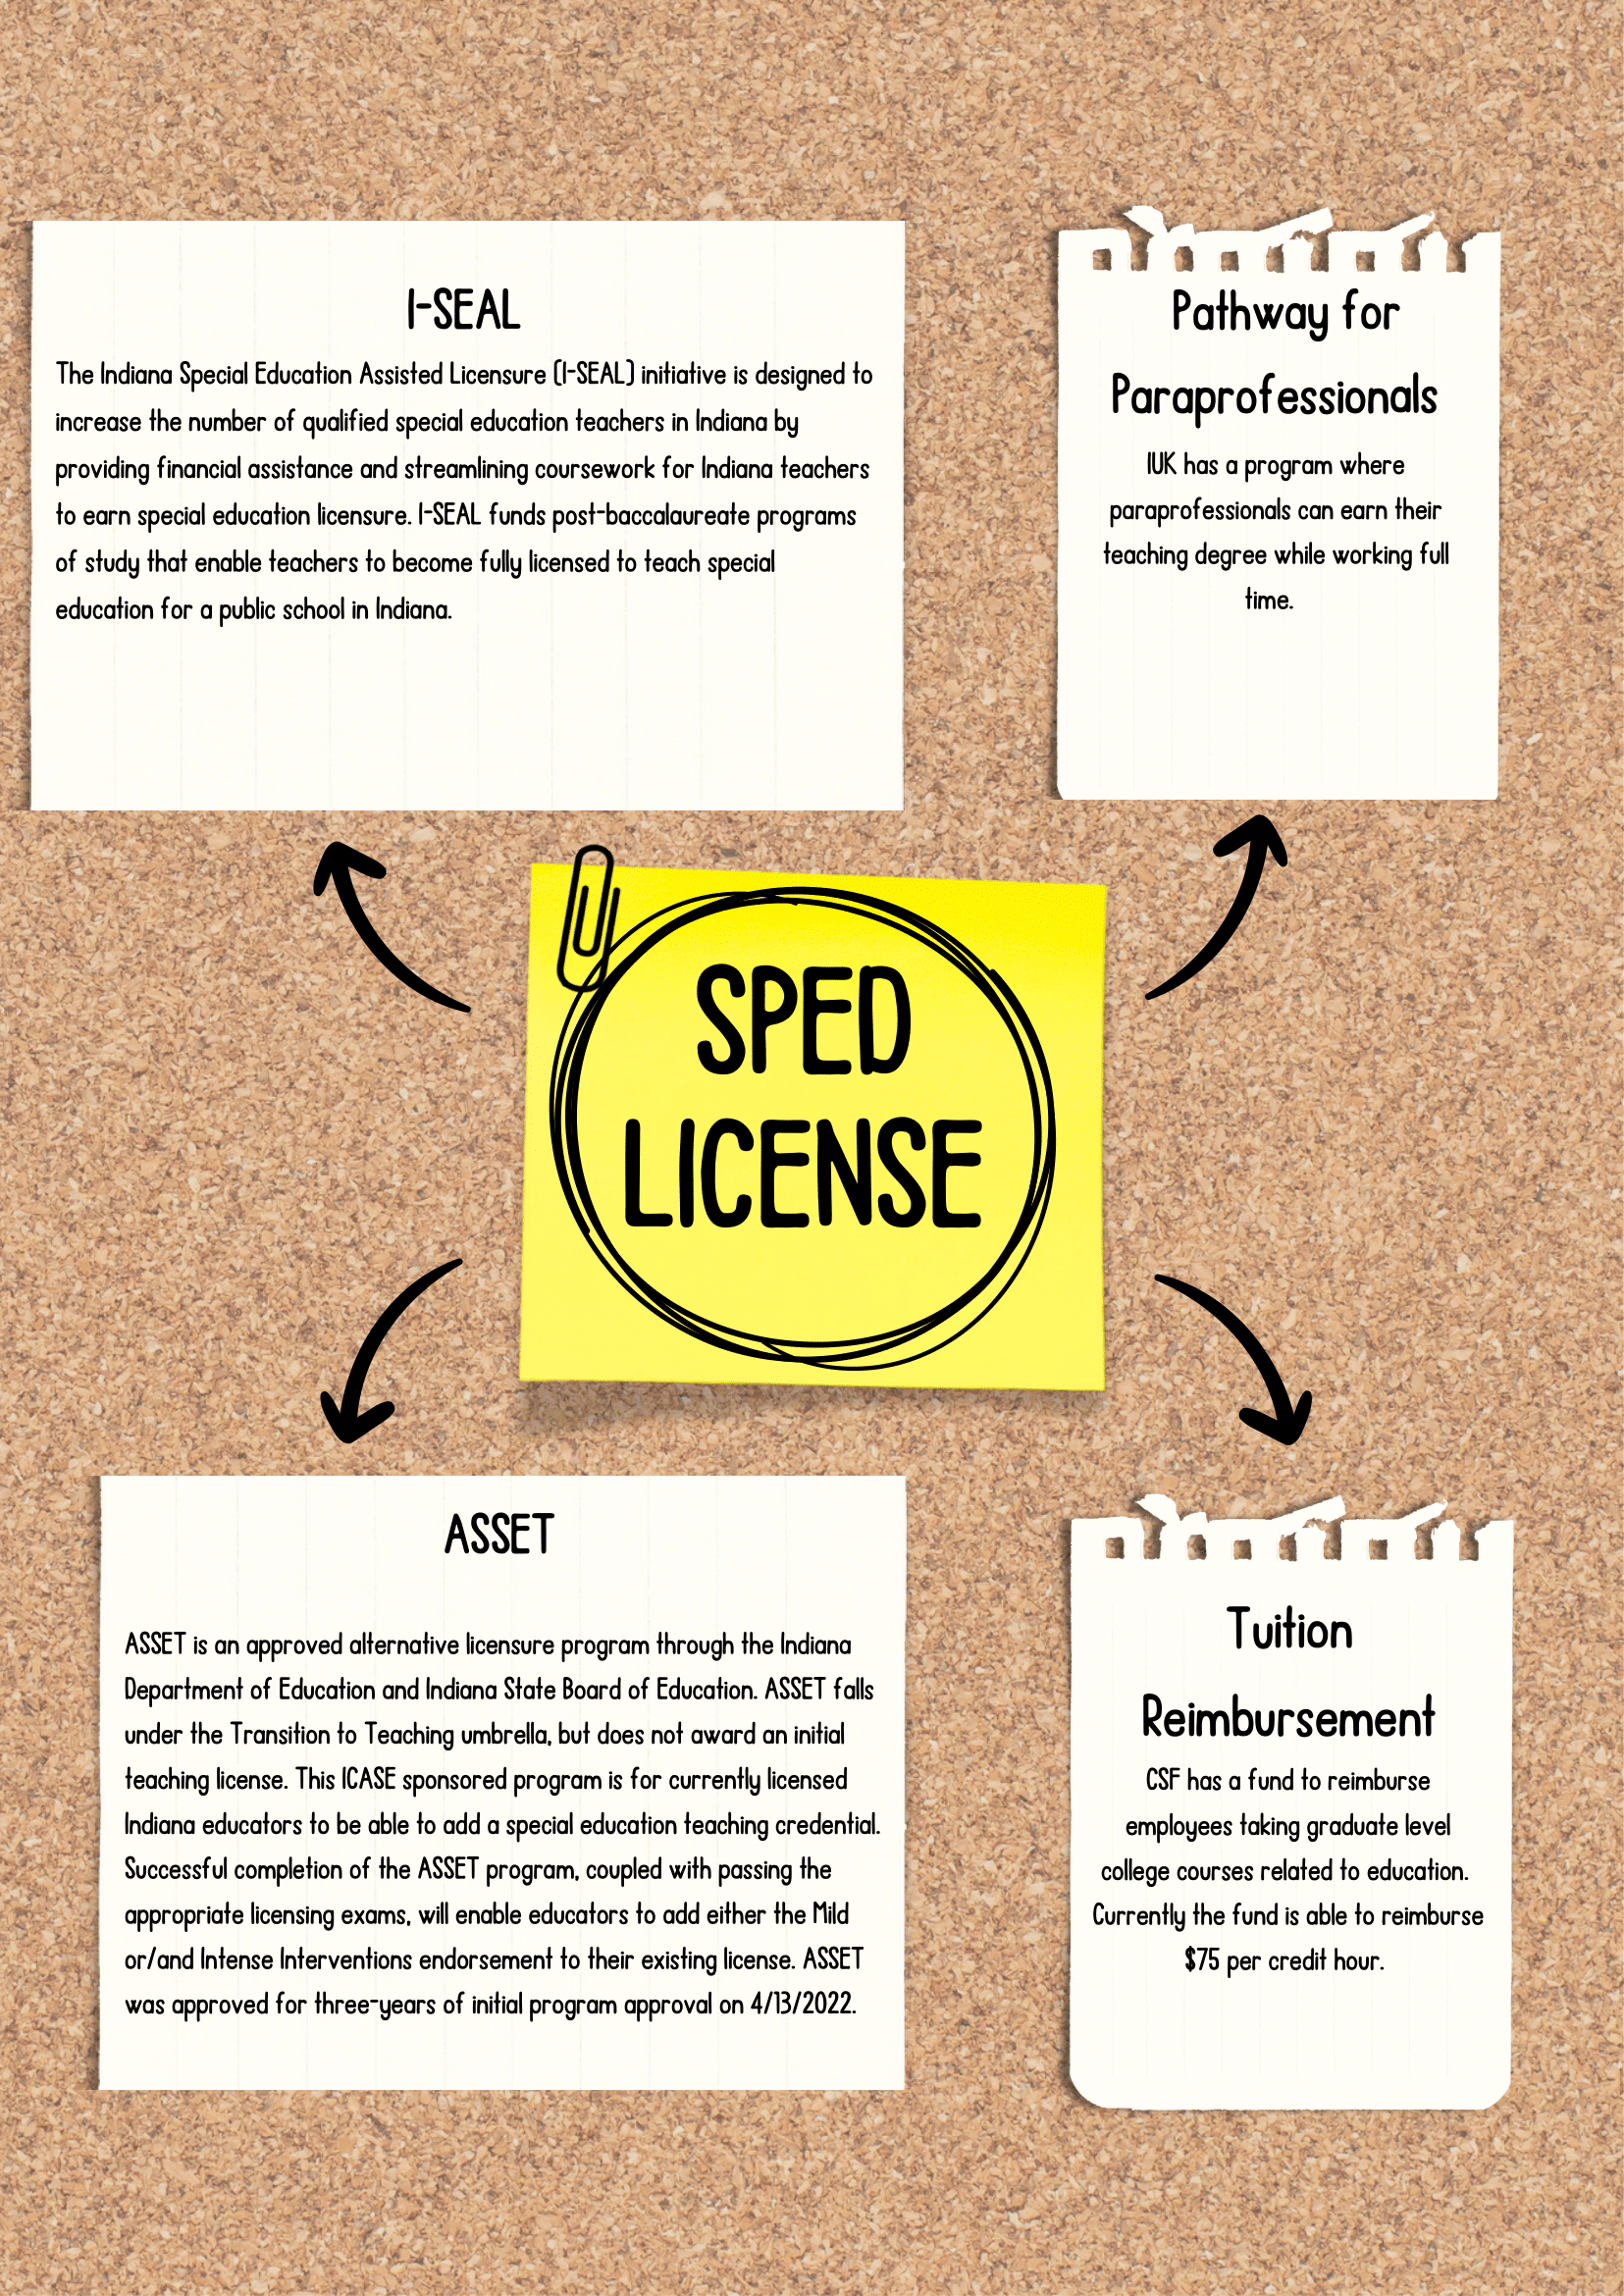 Information on SpEd licensing.